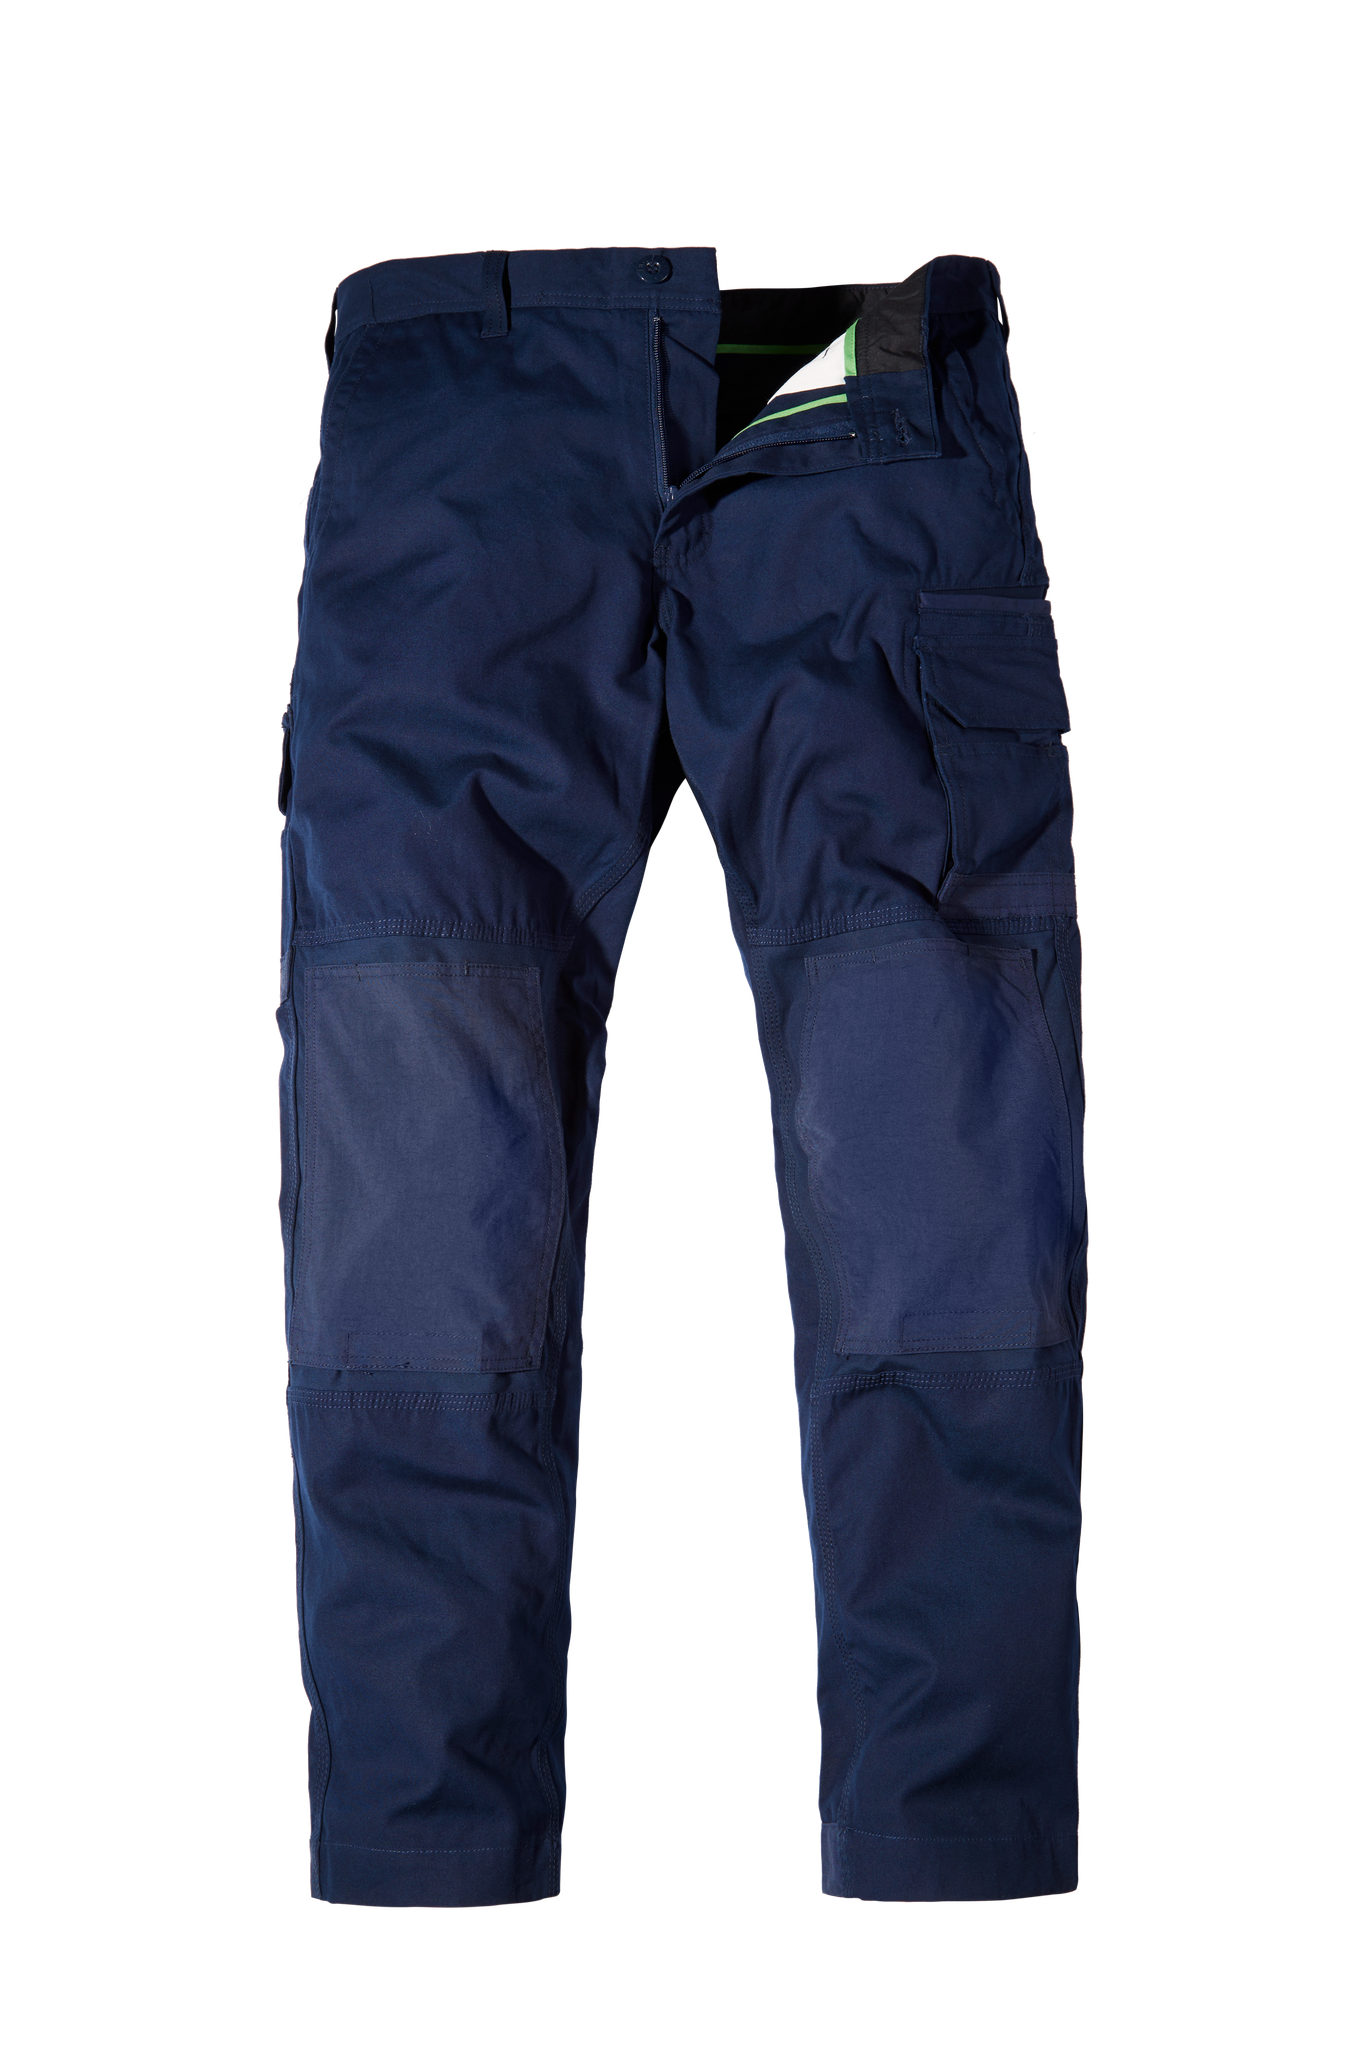 FXD WP-1 Pant